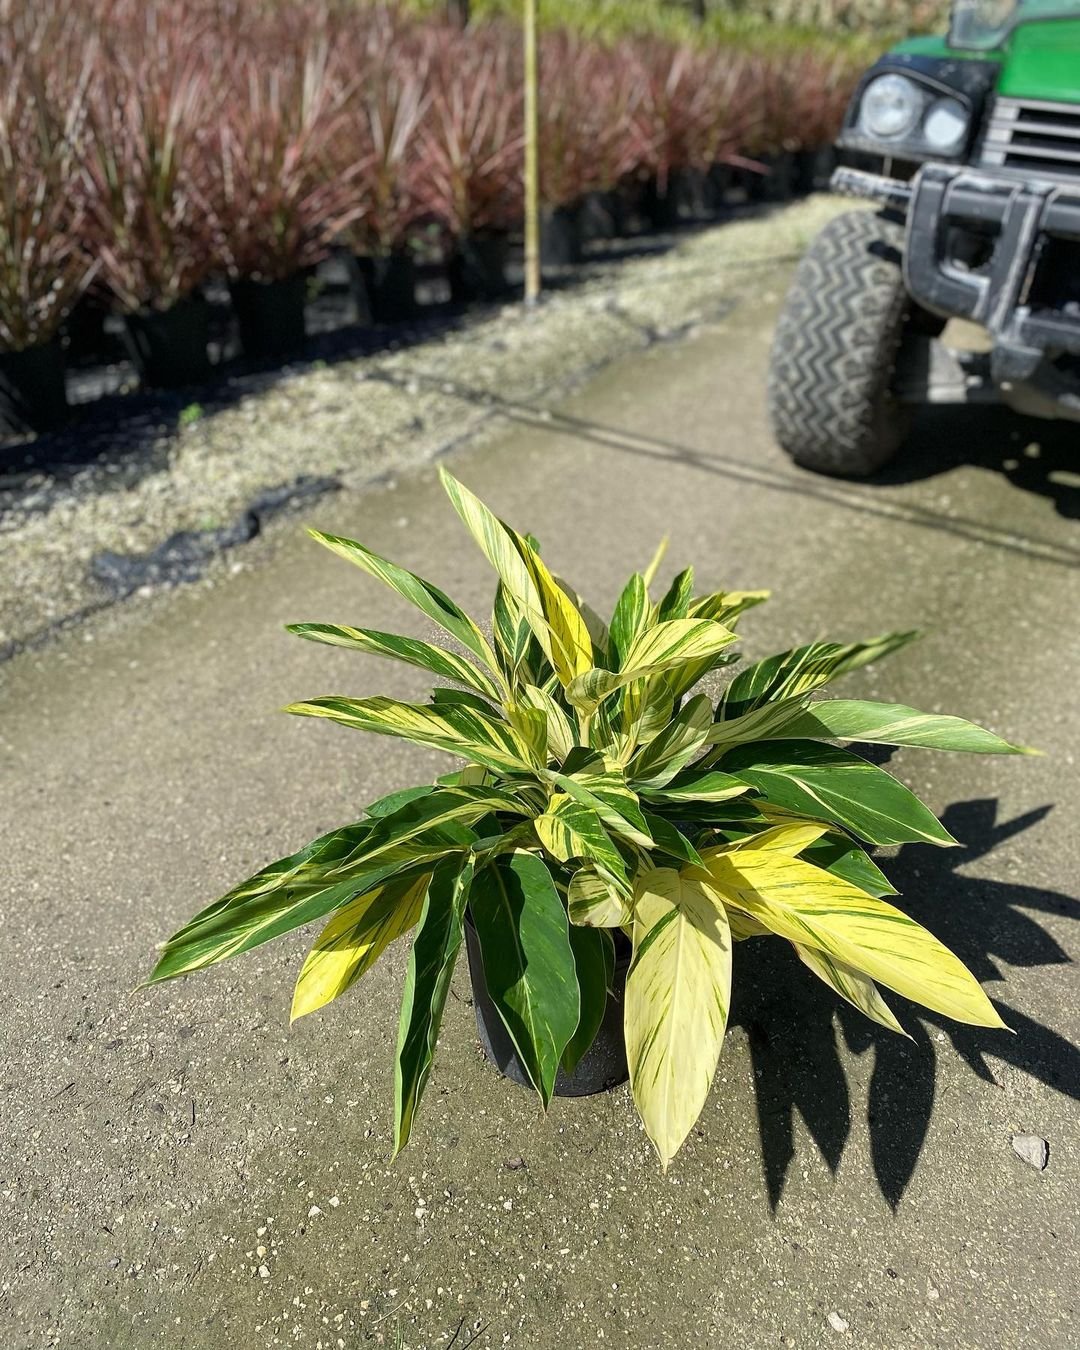 Variegated Shell Ginger potted plant in parking lot with tractor in background.